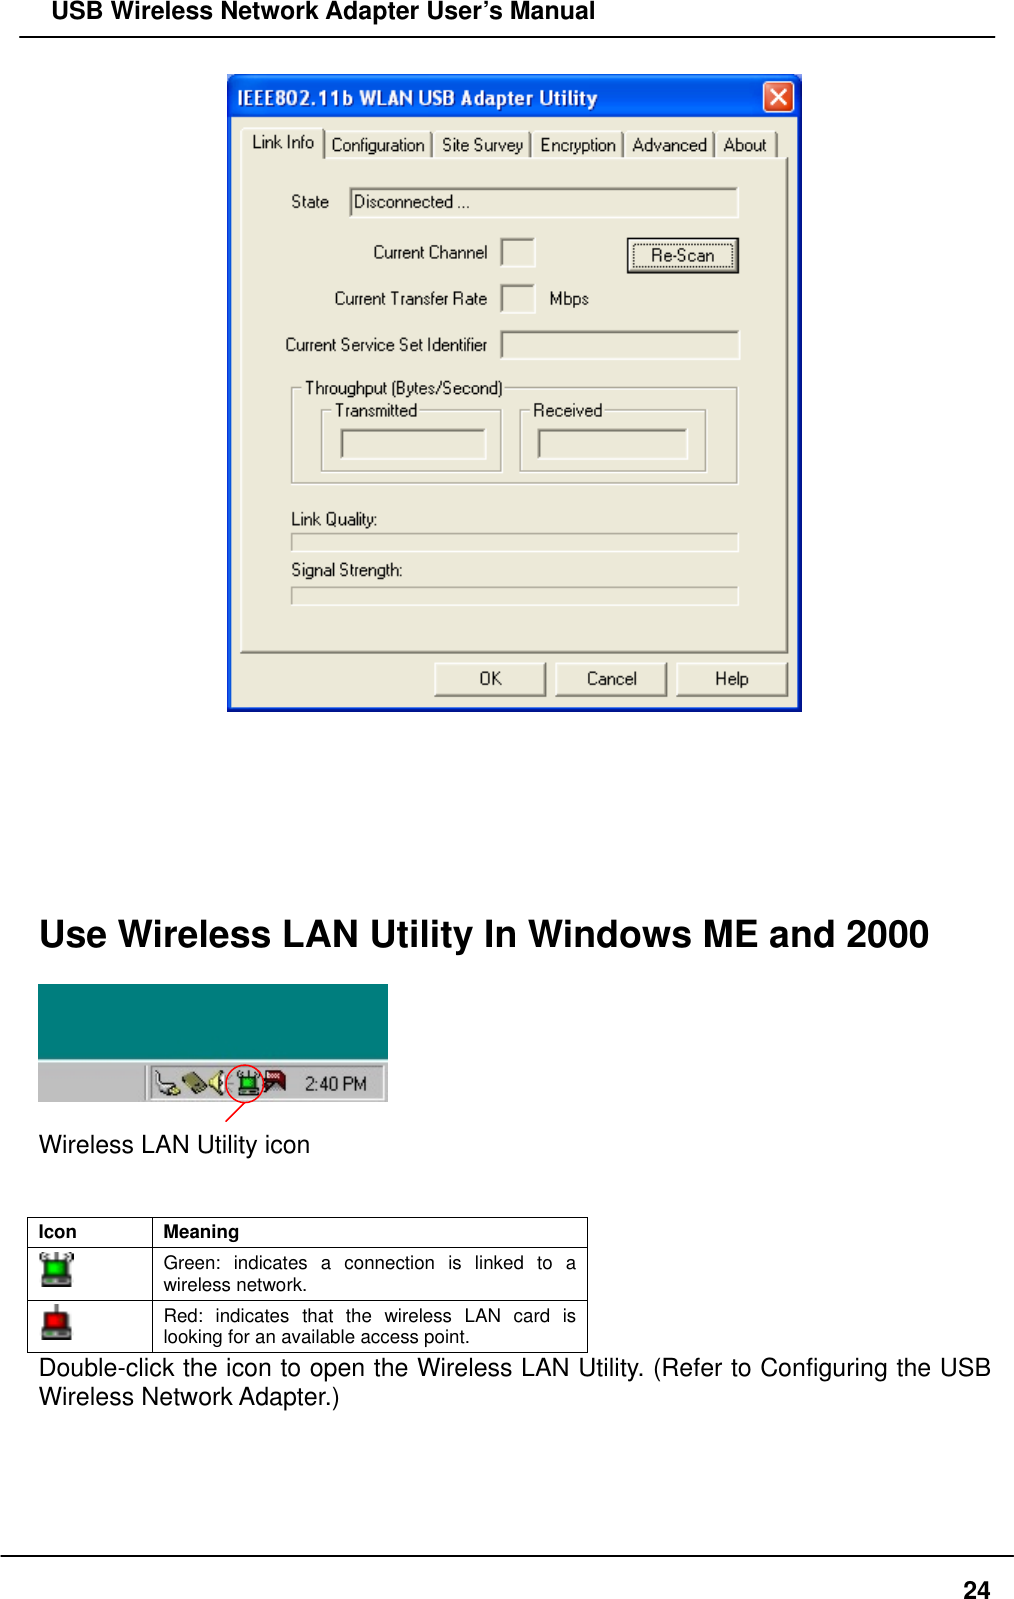   USB Wireless Network Adapter User’s Manual         Use Wireless LAN Utility In Windows ME and 2000    Wireless LAN Utility icon   Icon Meaning  Green: indicates a connection is linked to a wireless network.  Red: indicates that the wireless LAN card is looking for an available access point. Double-click the icon to open the Wireless LAN Utility. (Refer to Configuring the USB Wireless Network Adapter.)     24